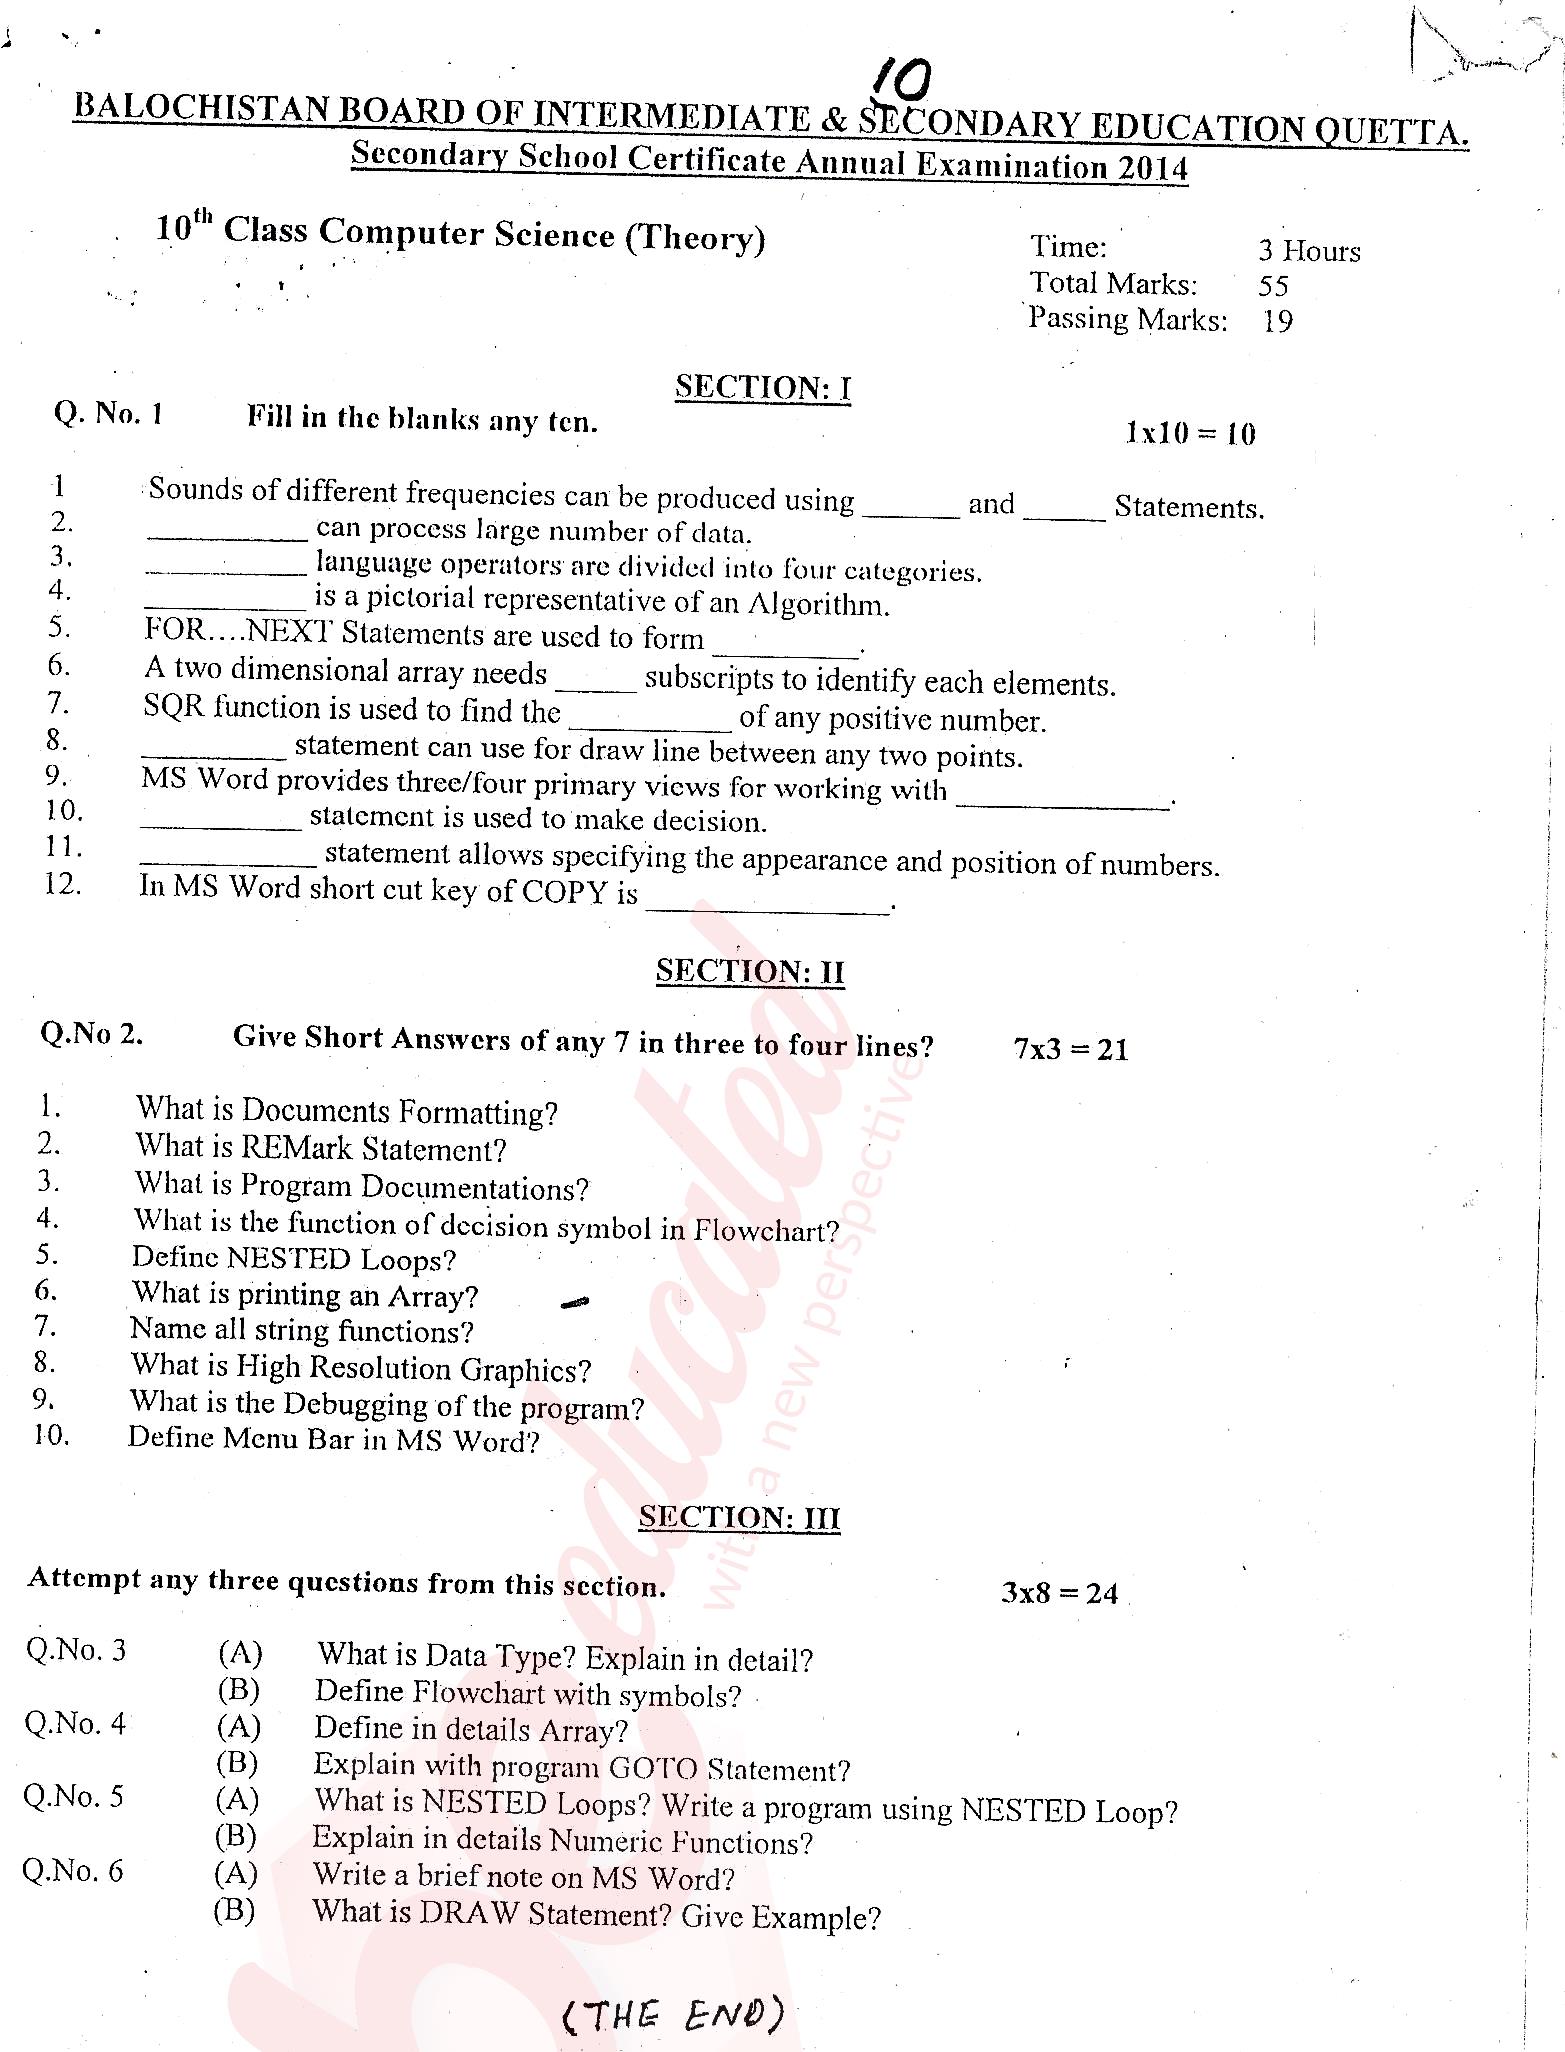 Computer Science 10th English Medium Past Paper Group 1 BISE Quetta 2014